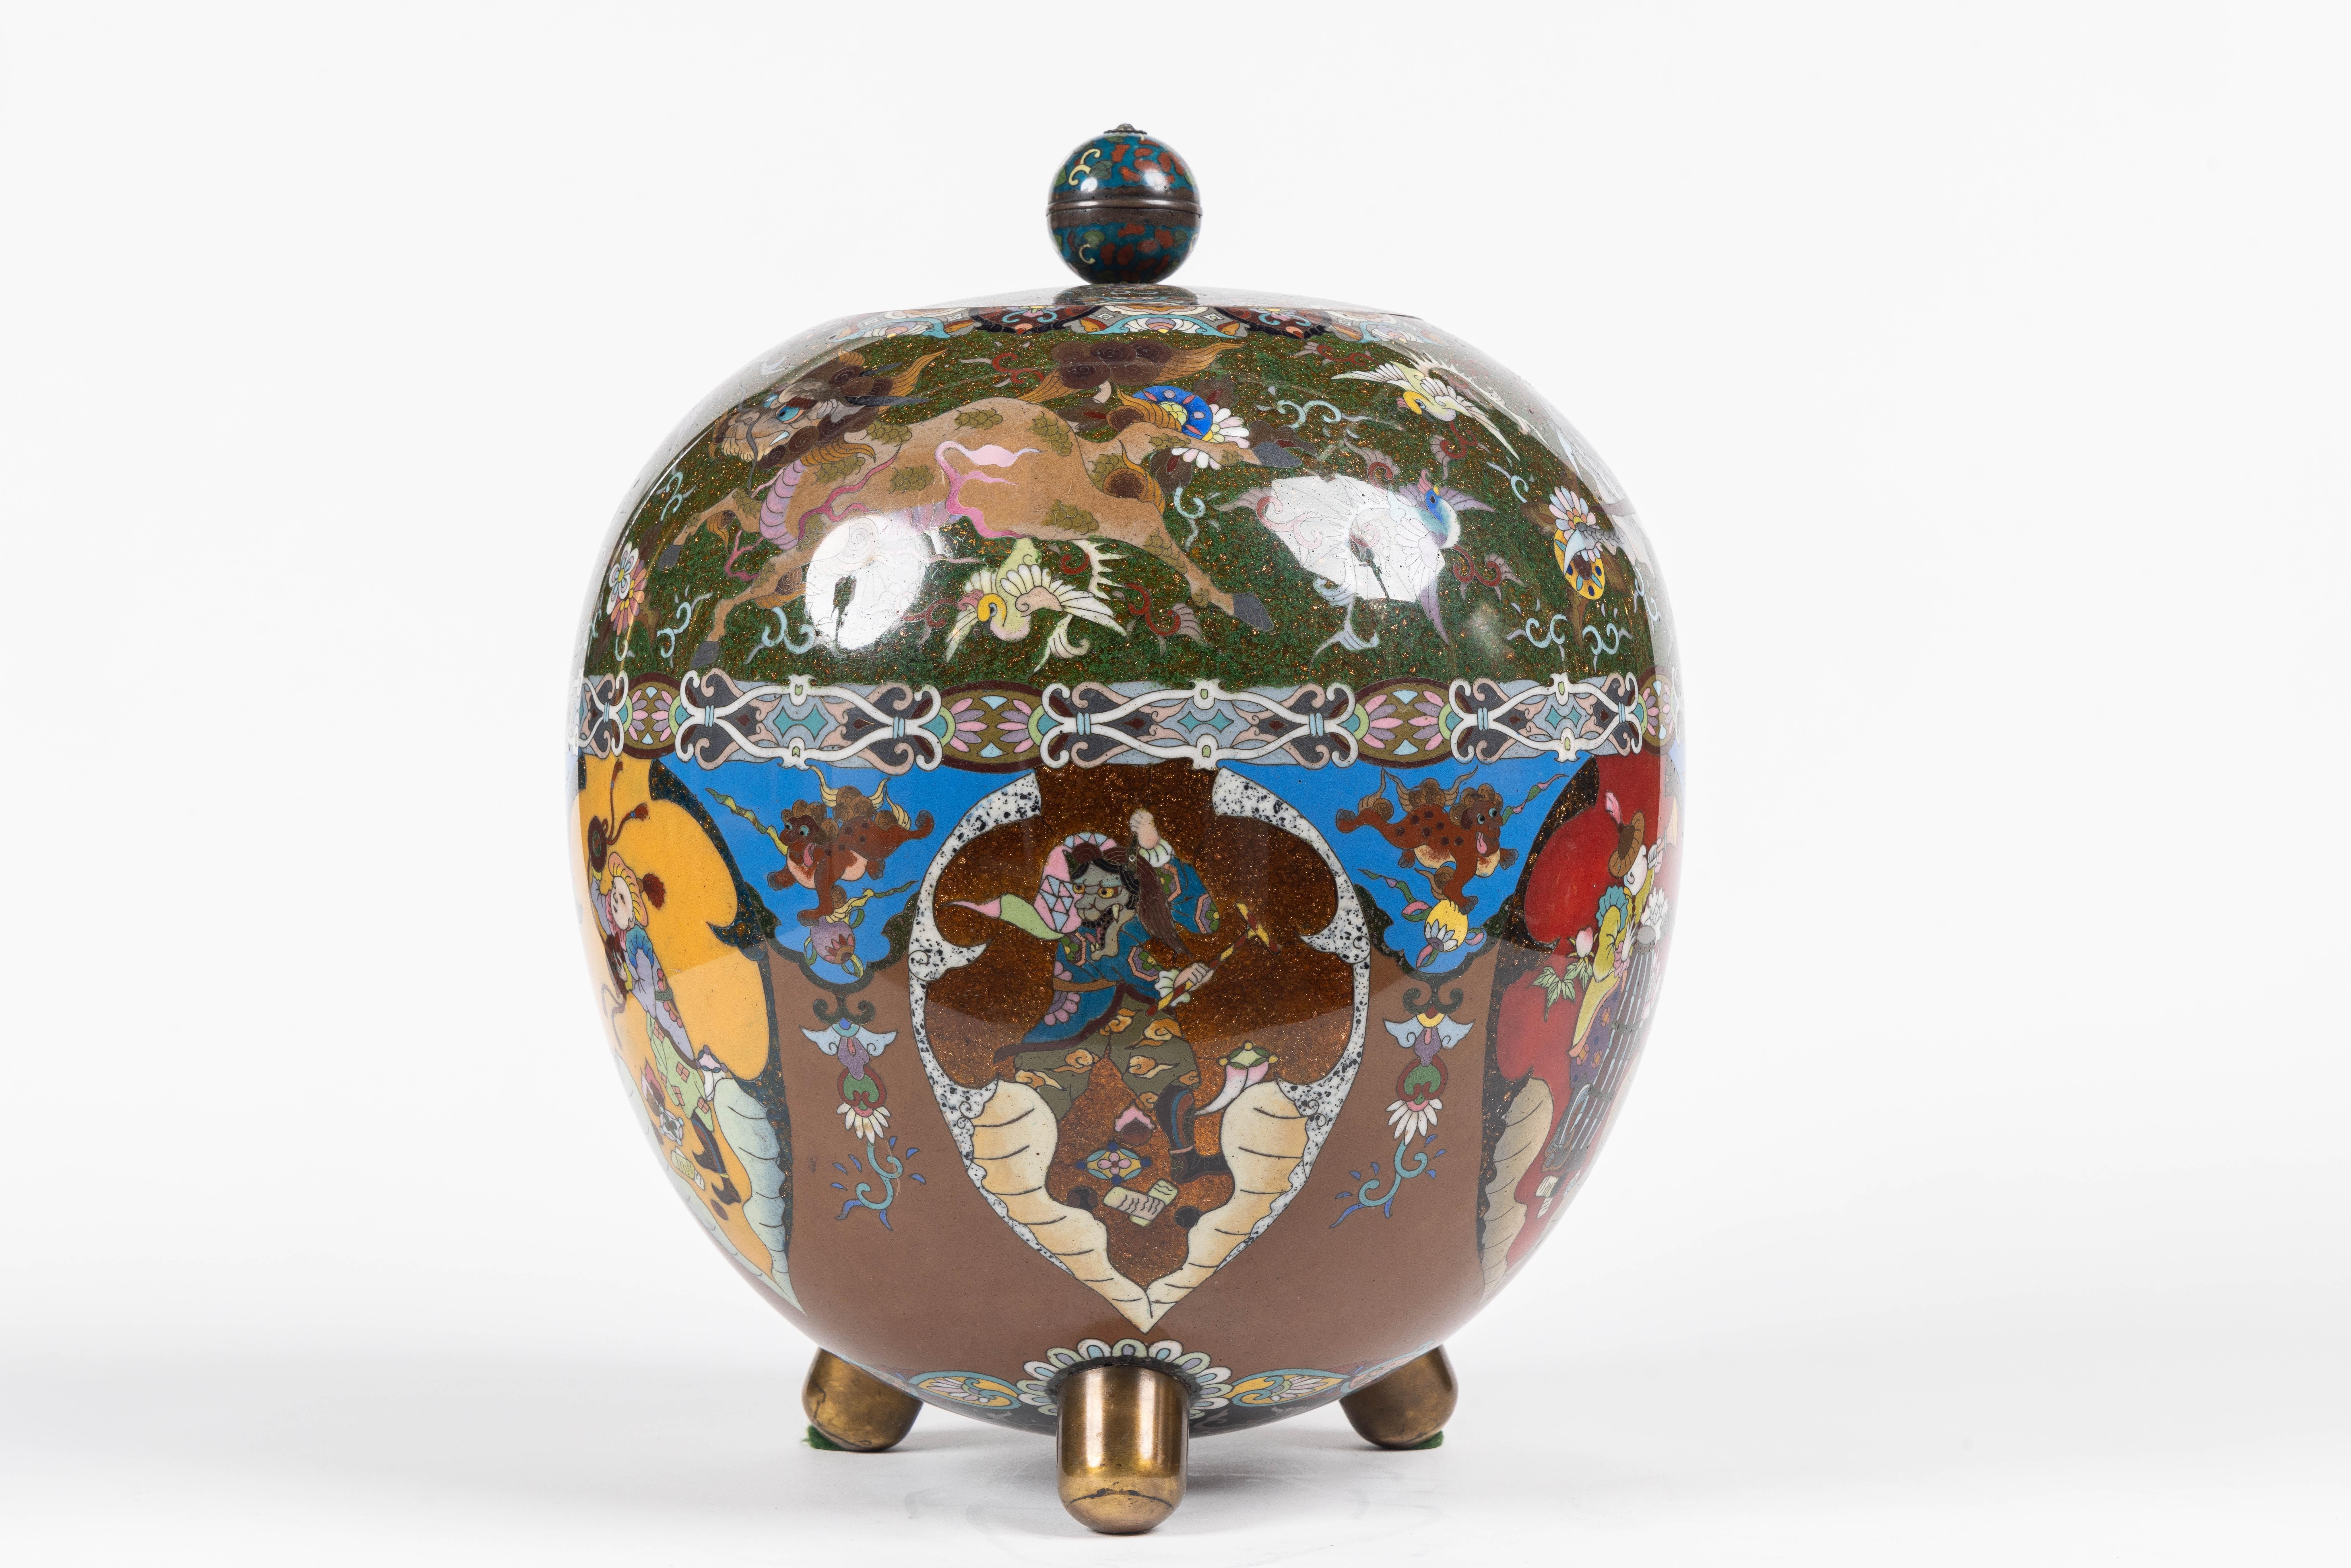 19th Century Majestic Japanese Cloisonne Enamel Covered Jar with Dragons, Theater Characters  For Sale